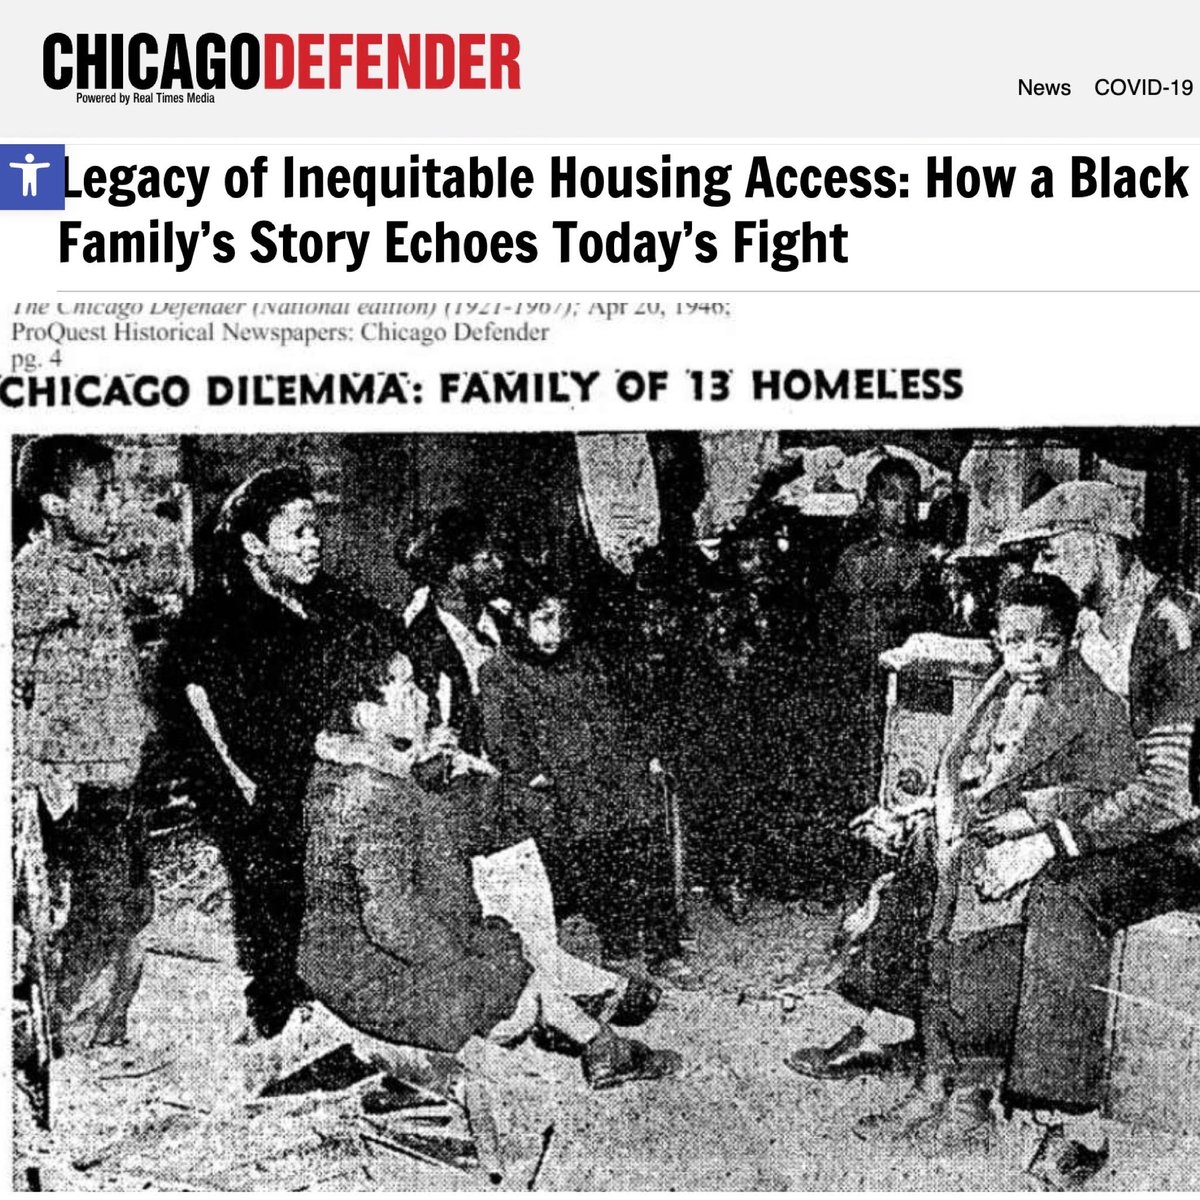 'How A Black Family's Story Echoes 2day's Fight
Carey Hemmons, his wife & 11 kids were evicted from their #SouthSide apt in #Chicago’s storied Black Belt 80yrs ago
chicagodefender.com/legacy-of-ineq…—@ChiDefender
#segregation @ShameofChicago @HealingIllinois @FieldFoundation @PublicNarrative